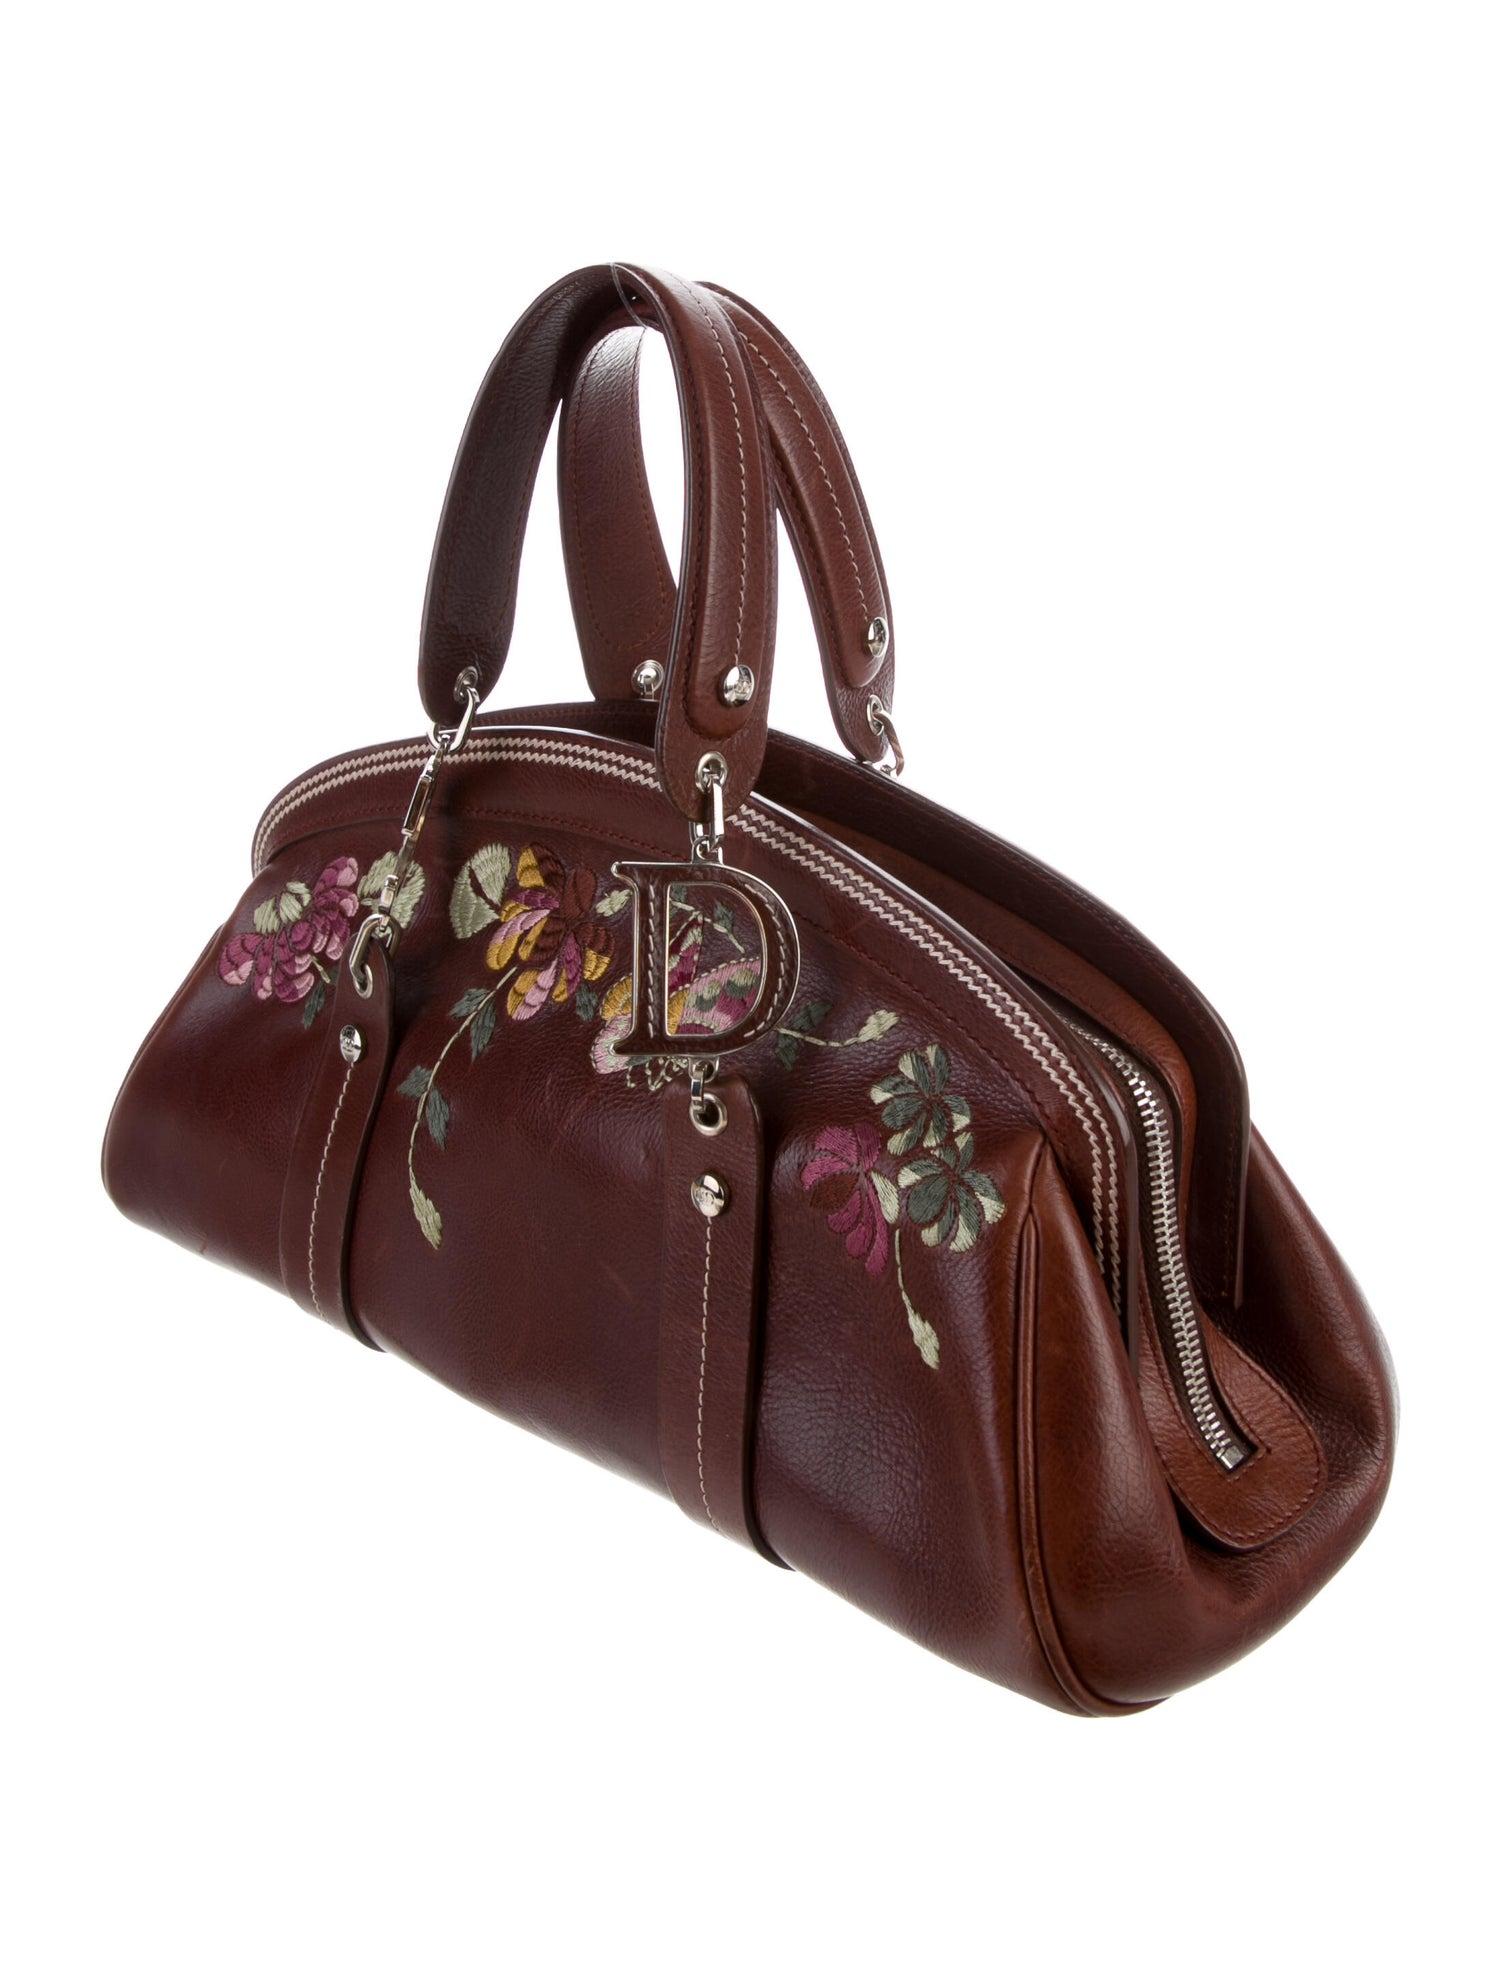 Christian Dior Top Handle Bag
2002 Collection by John Galliano

Details:
Brown Leather
Floral Embroidery
Silver-Tone Hardware
Flat Handles
Logo Jacquard Lining & Single Interior Pocket
Zip Closure at Top
Protective Feet at Base

Condition: Excellent
